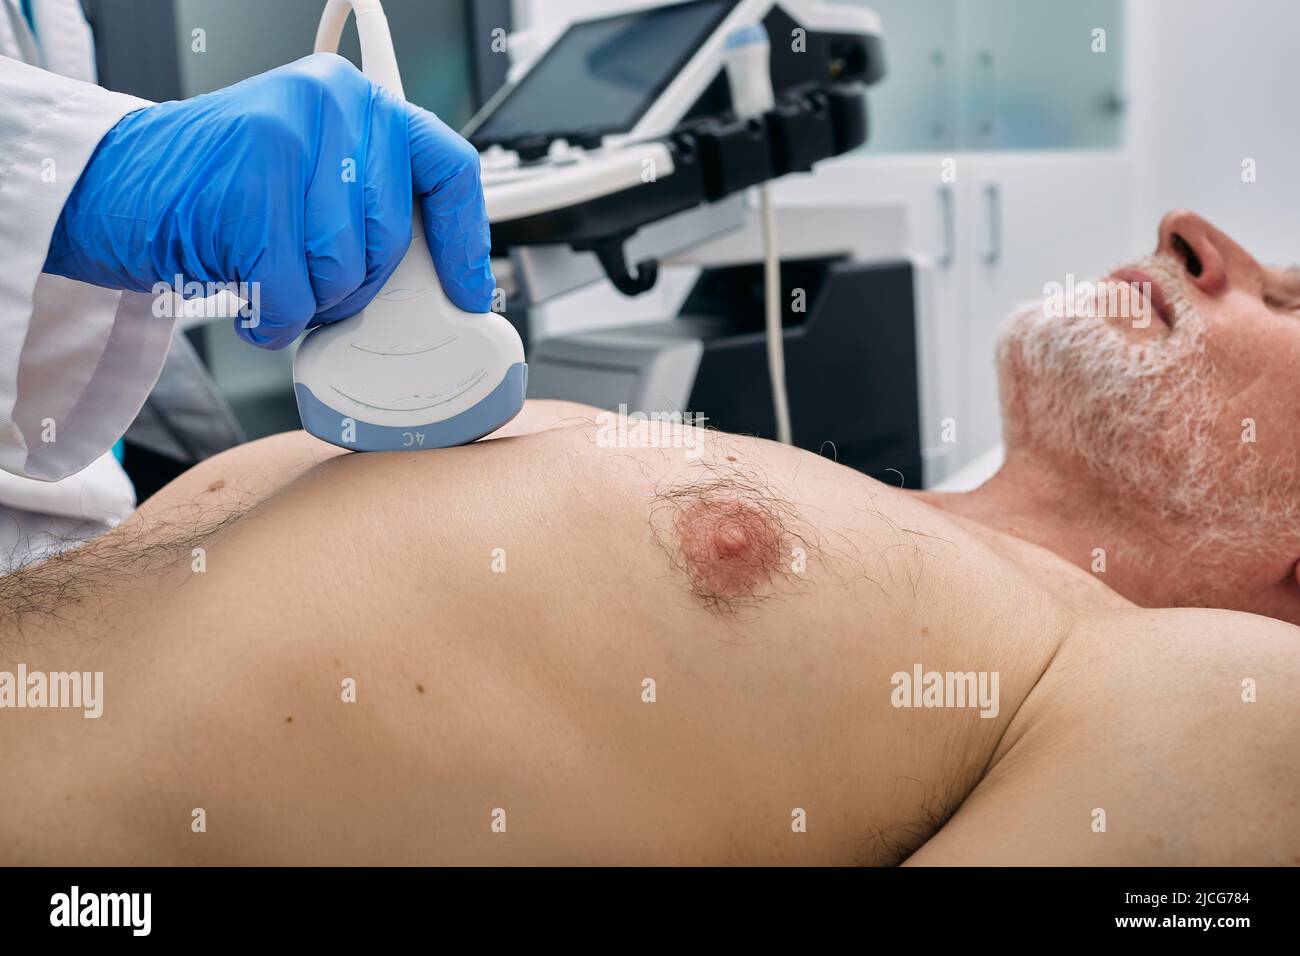 Heart health check-up with ultrasound scan machine. Heart ultrasound exam for elderly man with ultrasound specialist while medical exam Stock Photo